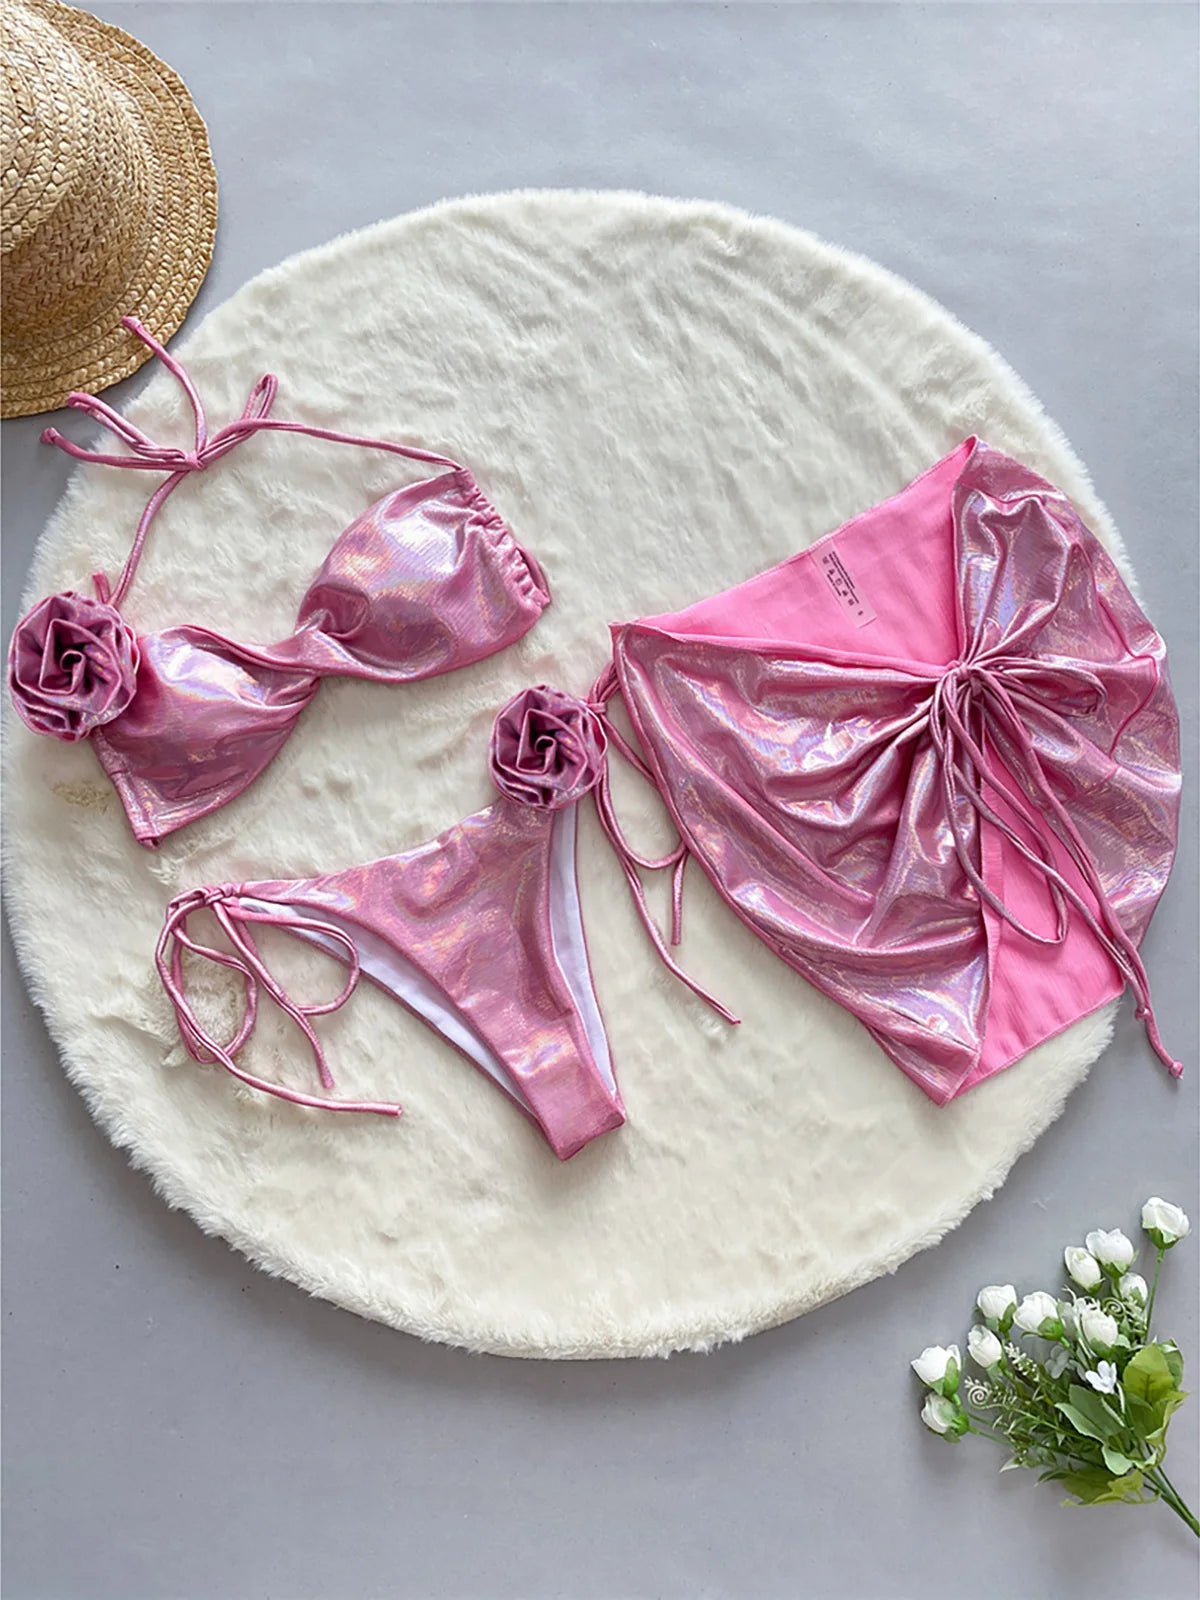 Elegant three-piece halter bikini set in pink for women, adorned with shiny 3D flowers. Accompanied by a versatile skirt perfect for beachside strolling. Made from Nylon and Spandex, featuring a low waist design. Fits true to size and includes a pad. Available in sizes S, M, and L. Free shipping included. Specially designed for women aged 18 to 35.